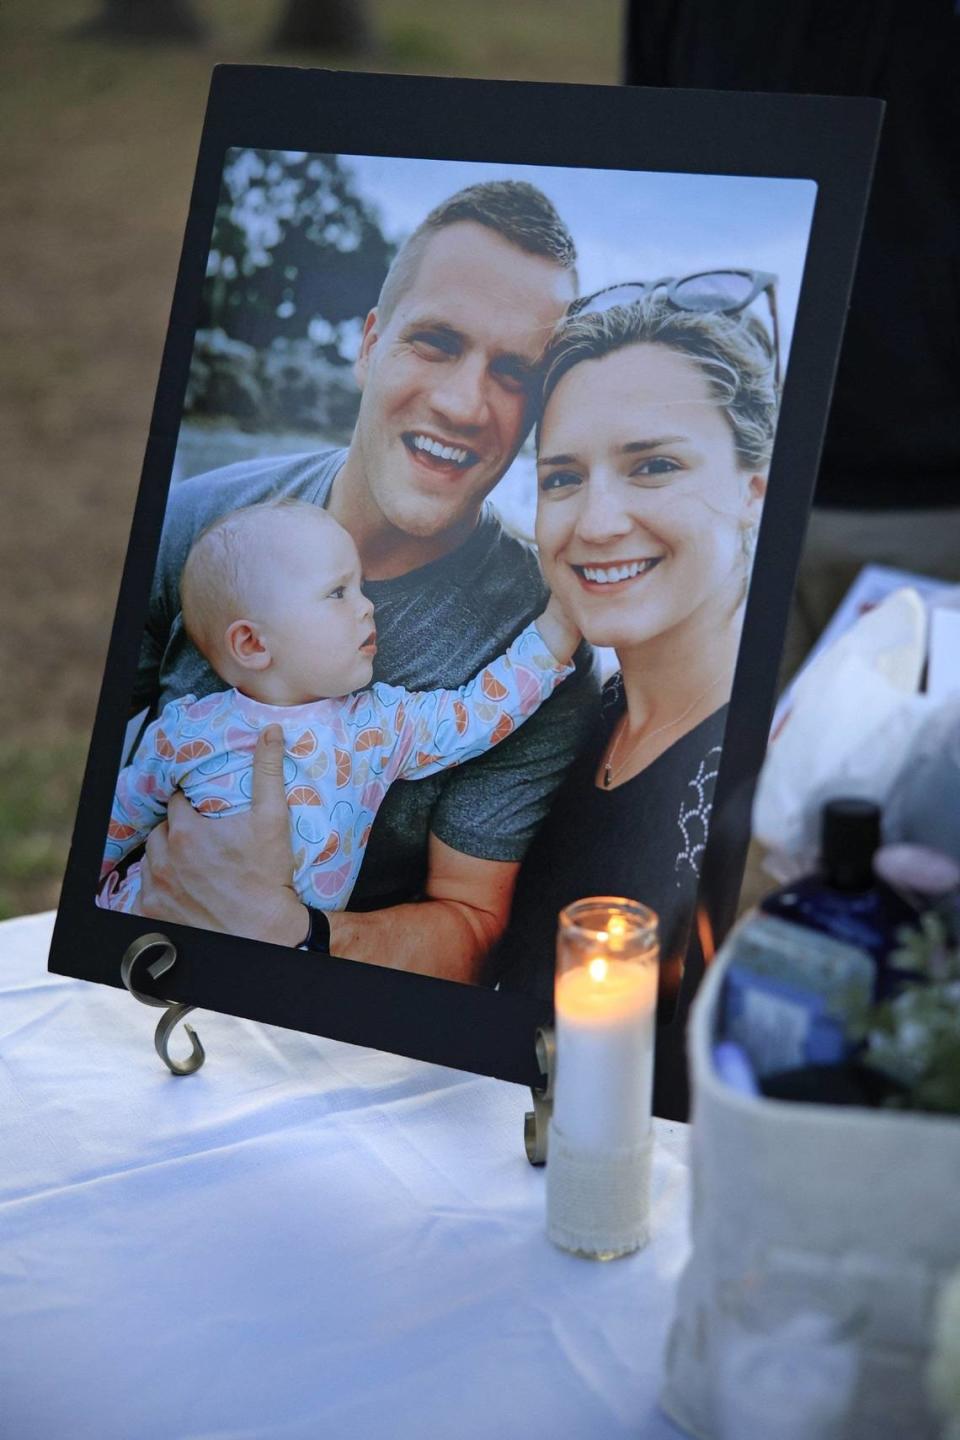 A family portrait of Jared and Kirsten Bridegan with their now 2-year-old daughter Bexley is displayed at Tuesday’s candlelight vigil in memory of the 33-year-old husband and father. He was shot and killed on Feb. 16 near the exit of The Sanctuary neighborhood in Jacksonville Beach in front of Bexley, police and family said. Jki 042122 Jaxbeachvigil 0 4